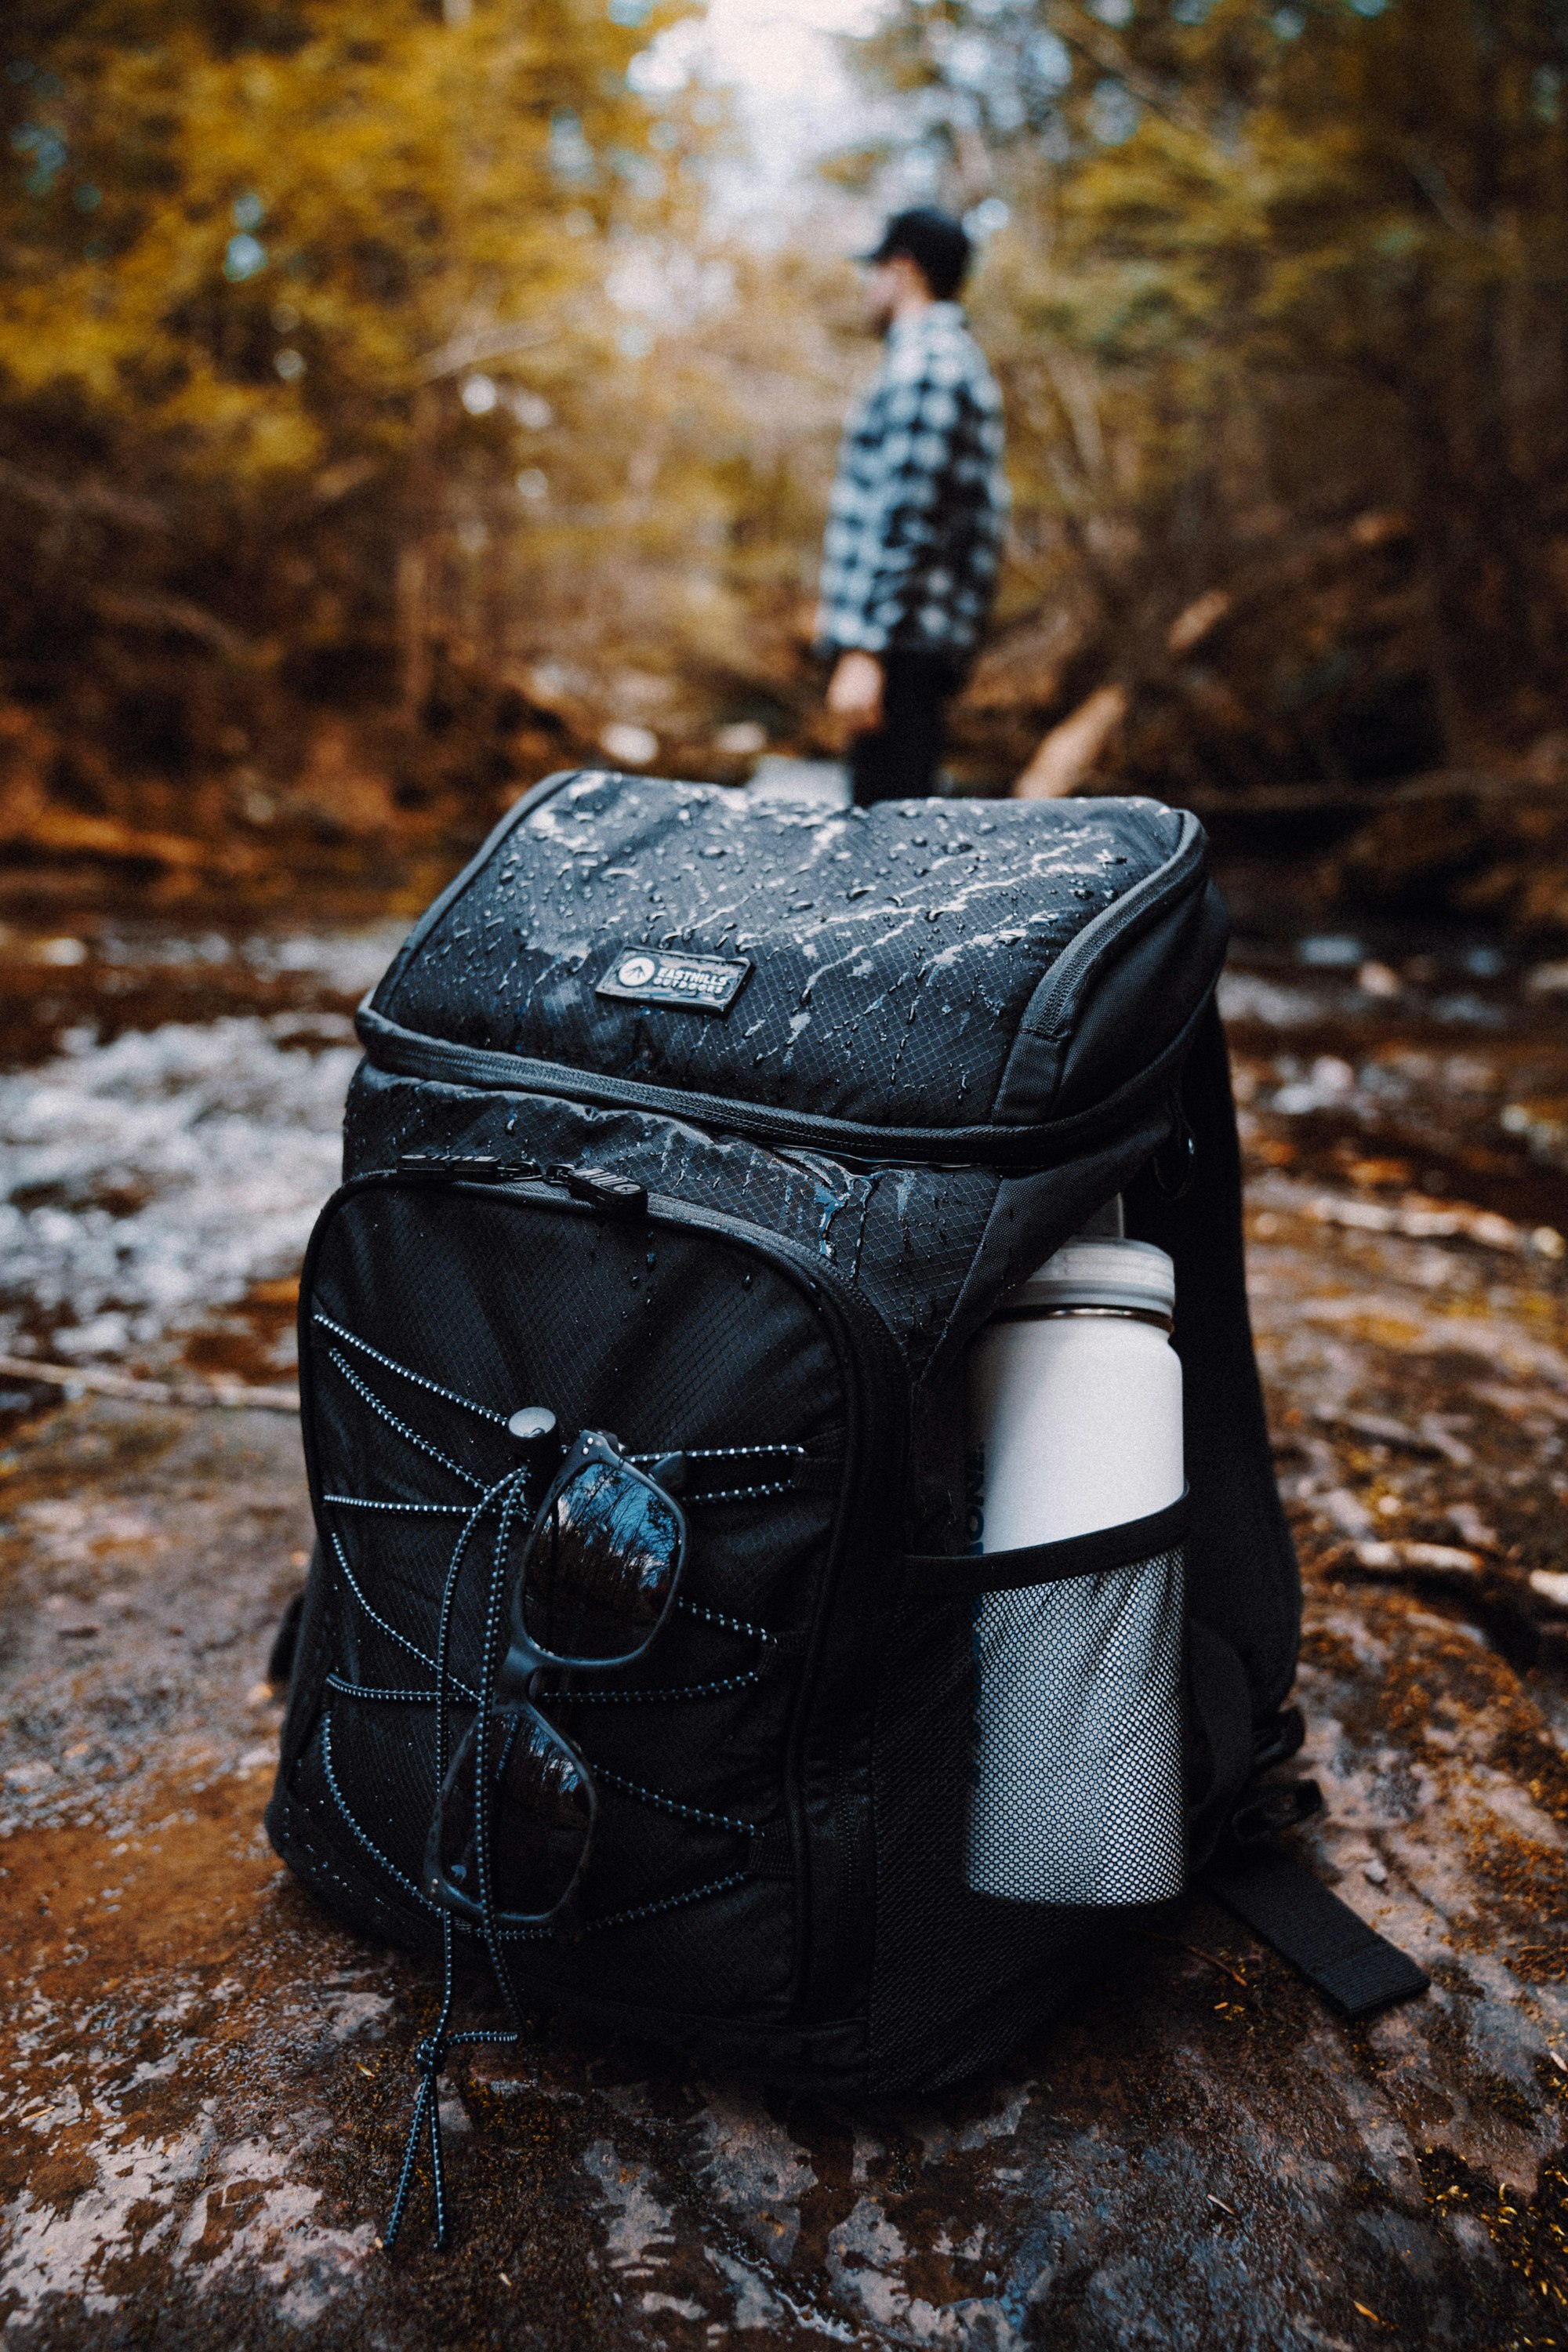 Top 6 Best Backpack Coolers of 2022 (Insulated Backpack) - Help To Keep Your Food And Drink Safe